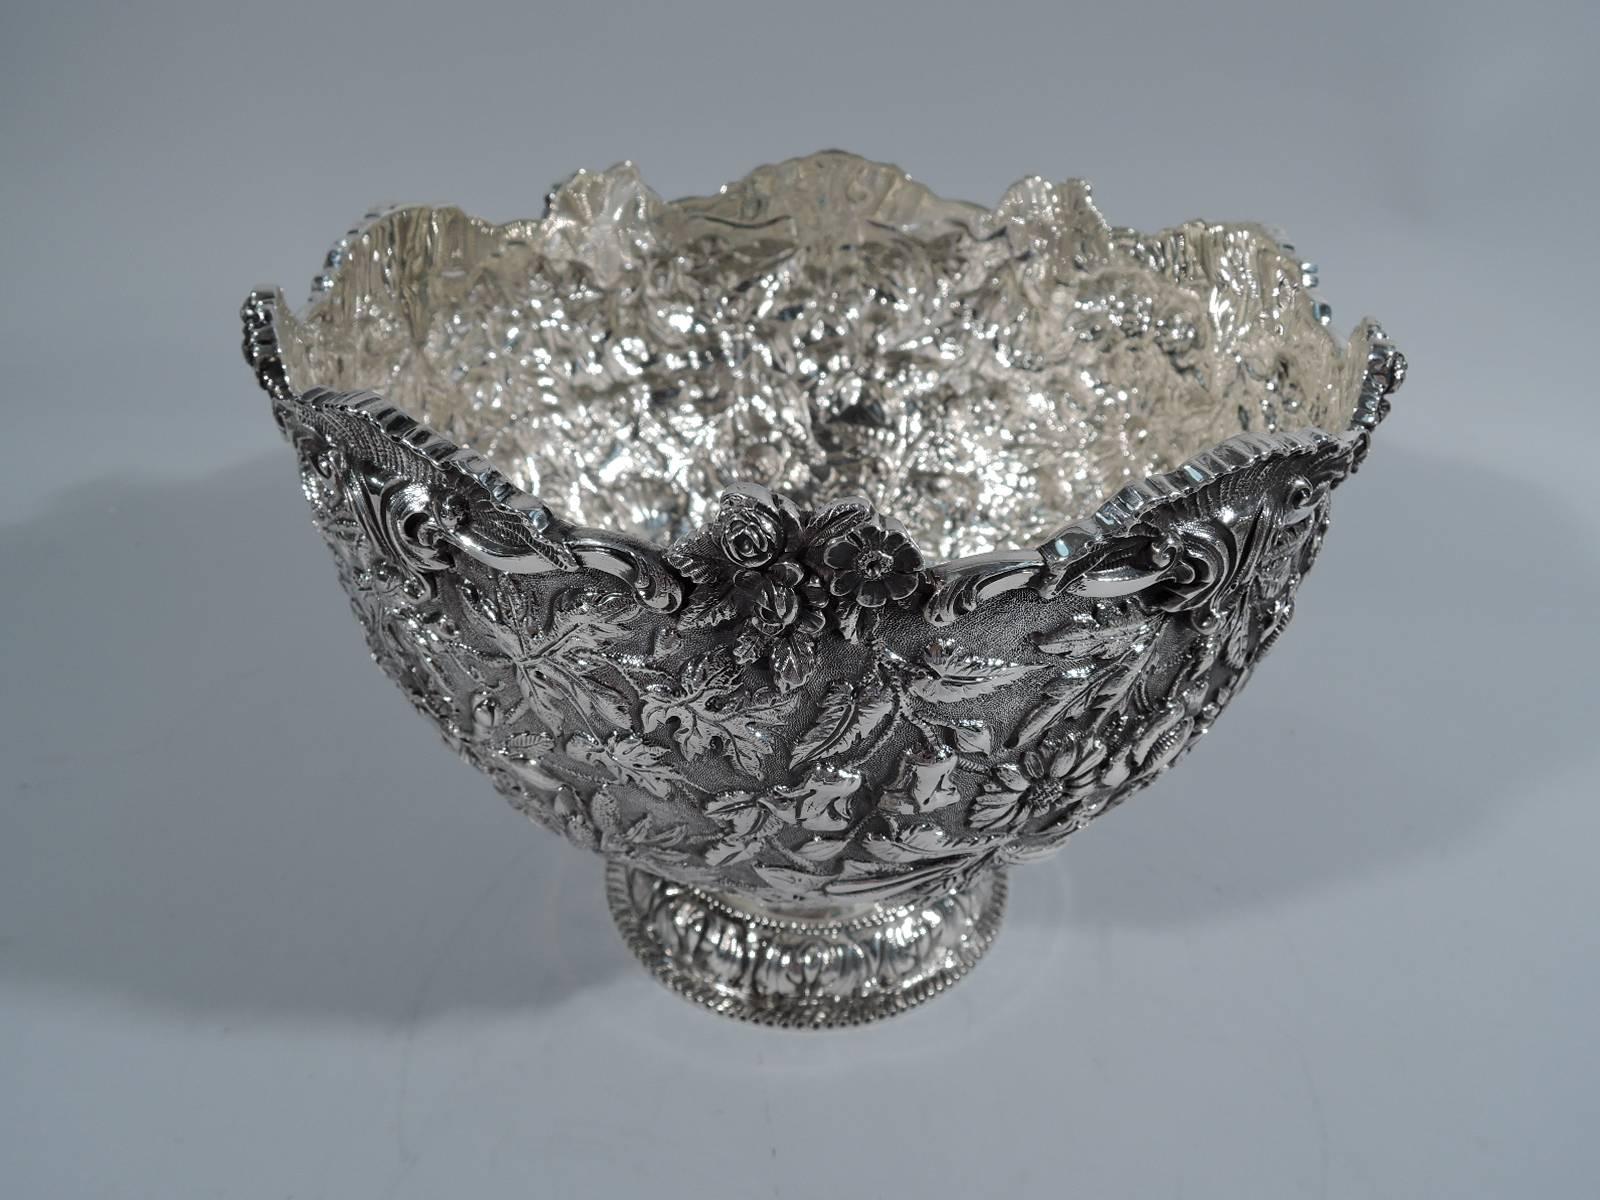 Beautiful sterling silver bowl. Made by S. Kirk & Son Co. in Baltimore in early 20th century. Deep and round bowl with floral repousse in form of scattered blossoms on stippled ground. Asymmetrical rim with alternating leaves and posies. Raised foot